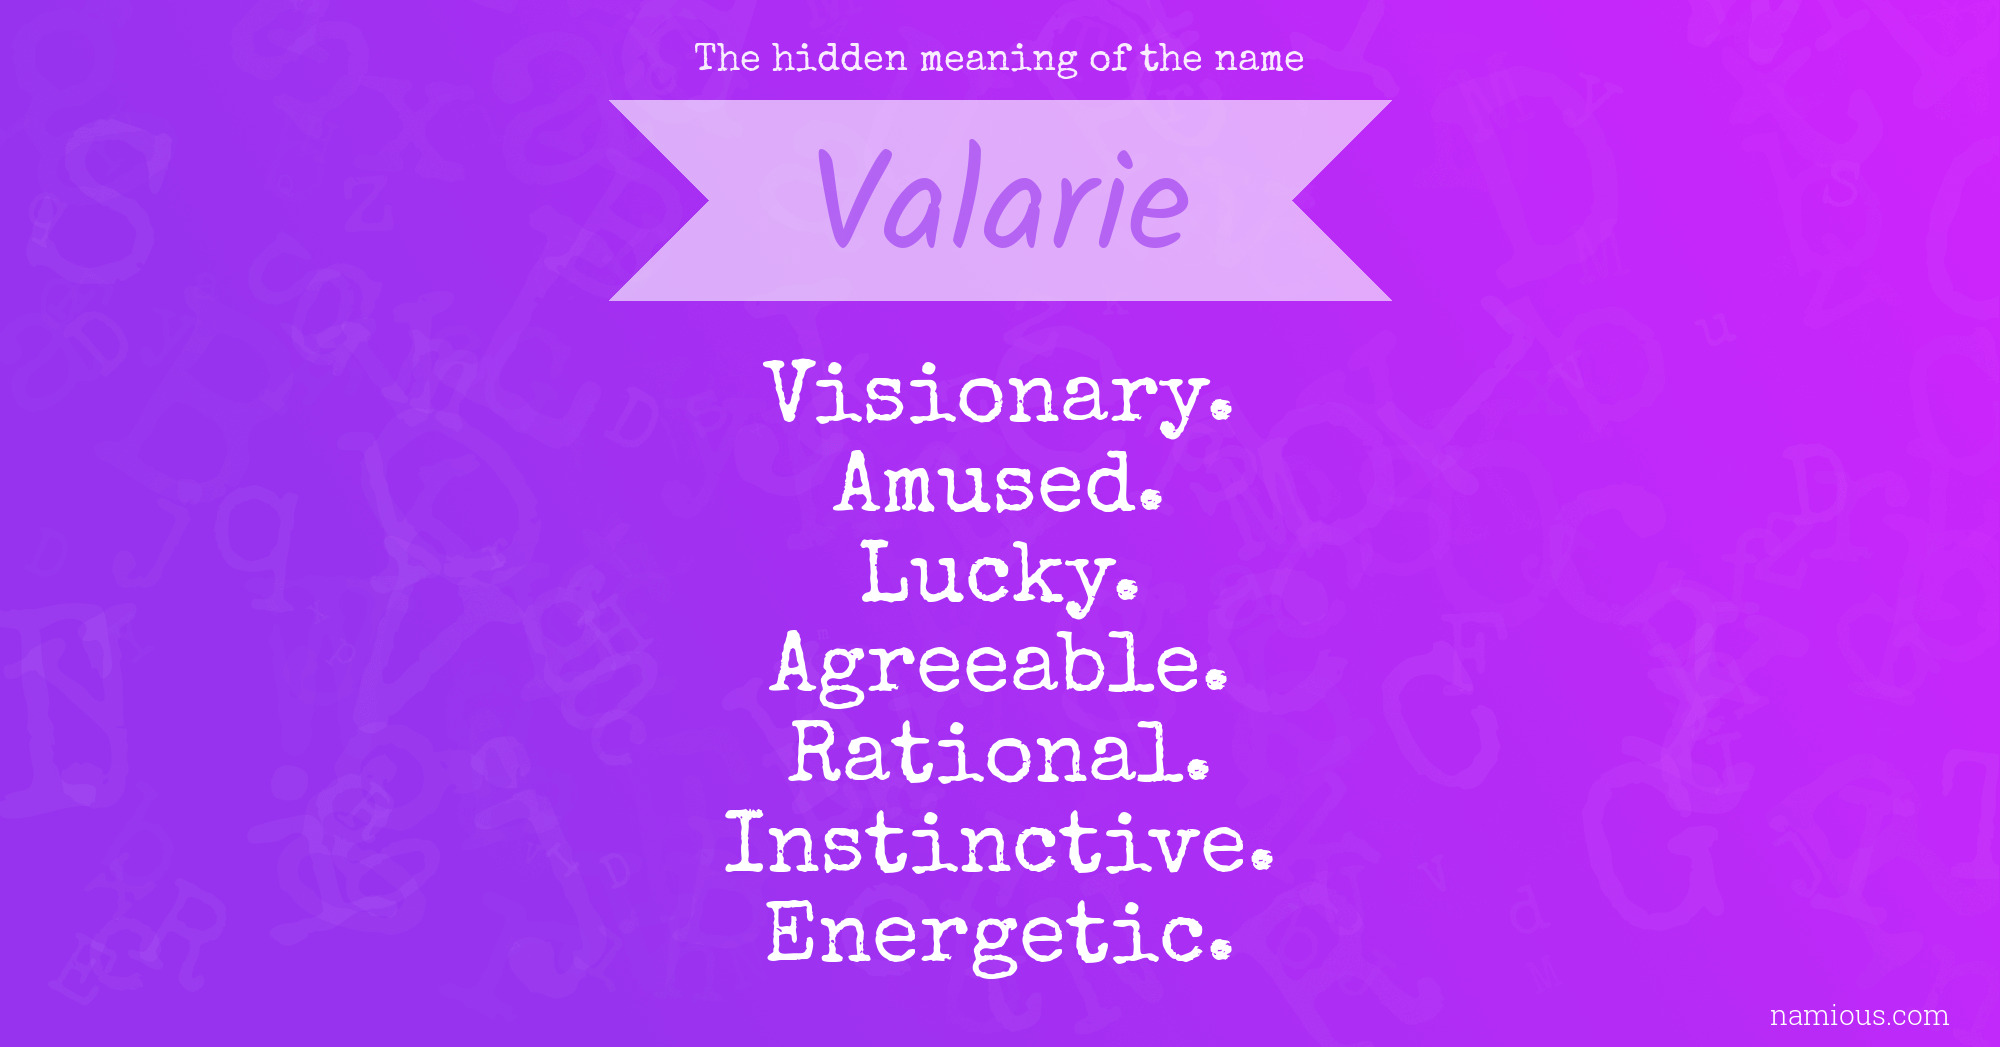 The hidden meaning of the name Valarie